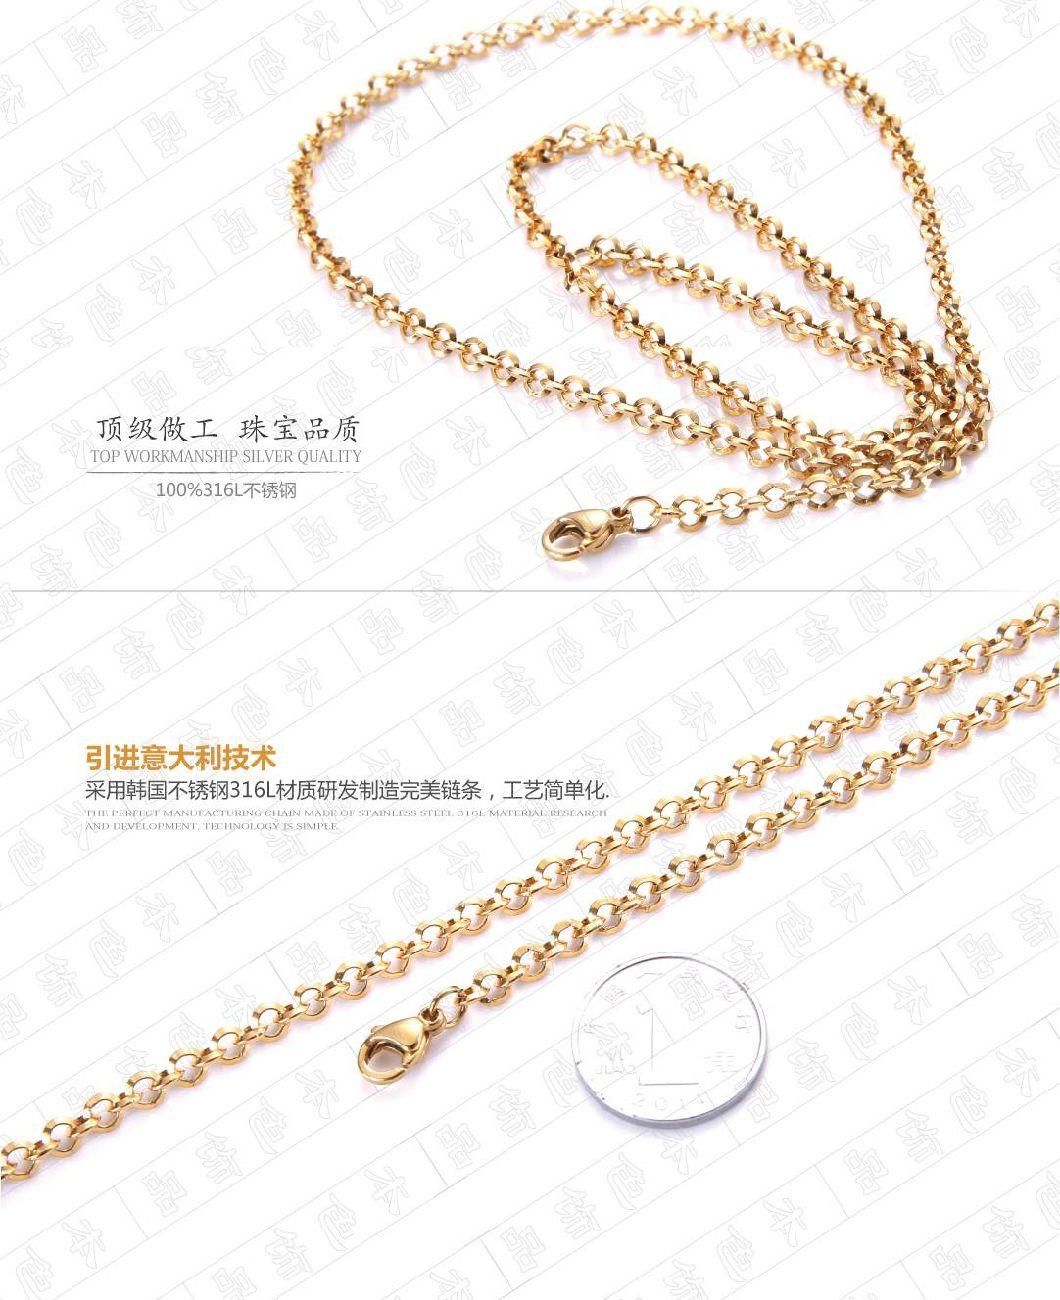 Fashionable Design Jewelry Triangle Wire Belcher Chain Necklace Closed Links